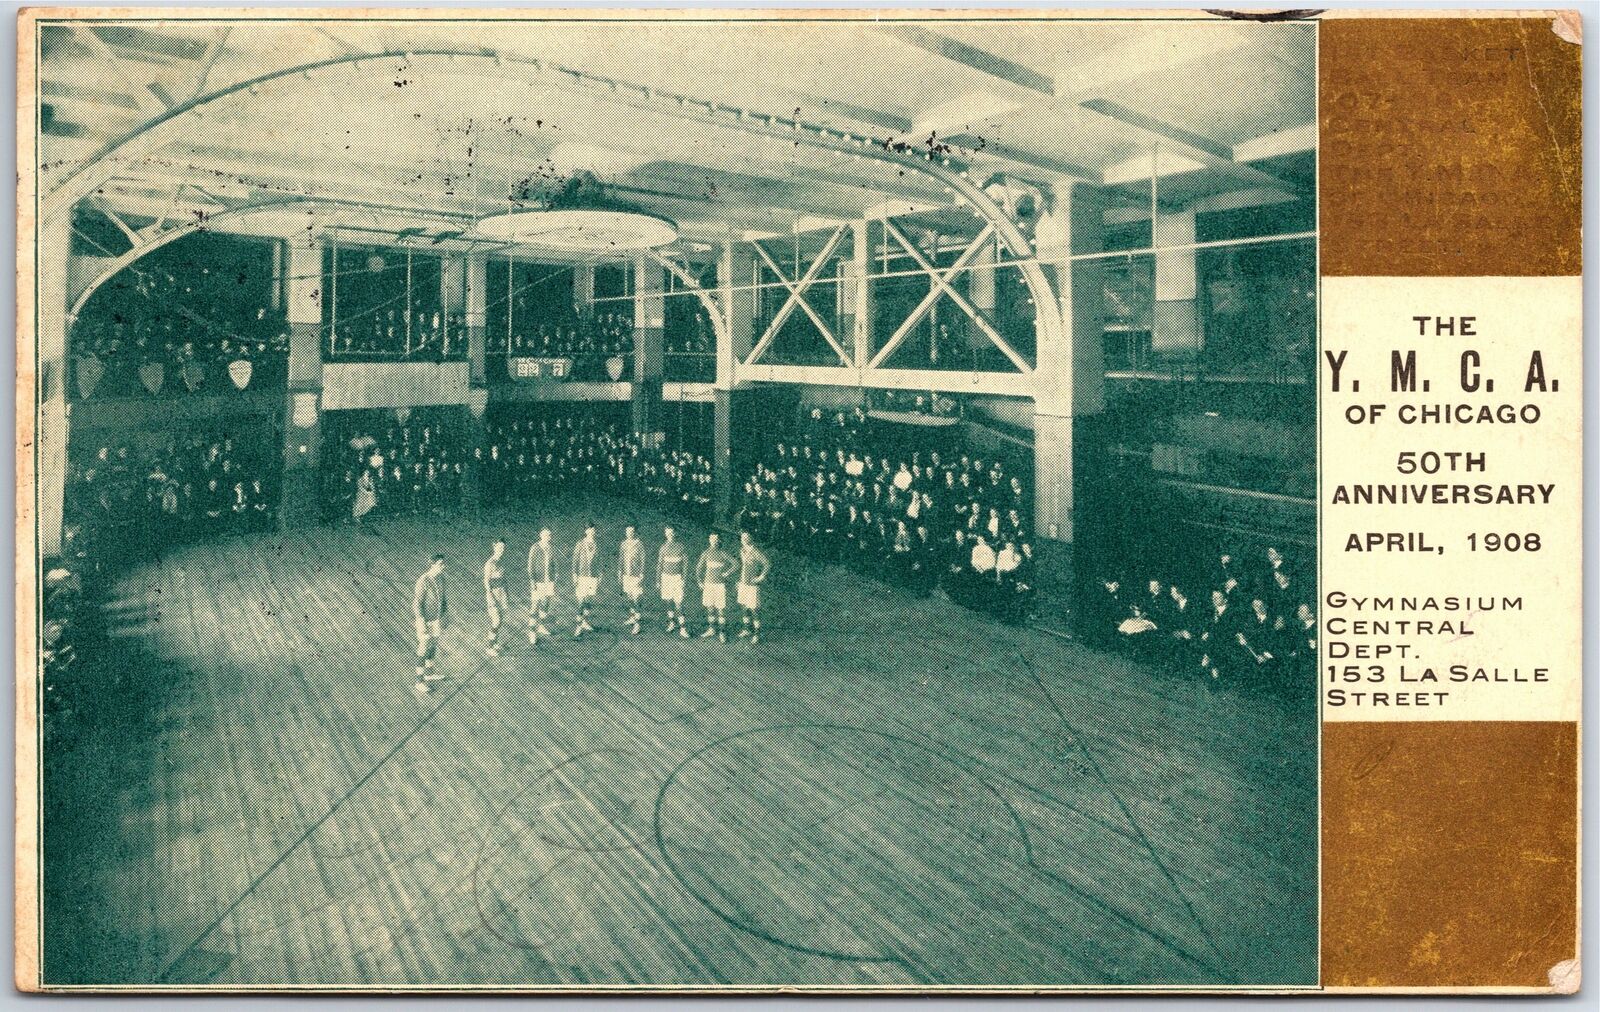 VINTAGE POSTCARD BASKETBALL COURT AT Y.M.C.A. OF CHICAGO 50th ANNIVERSARY 1908